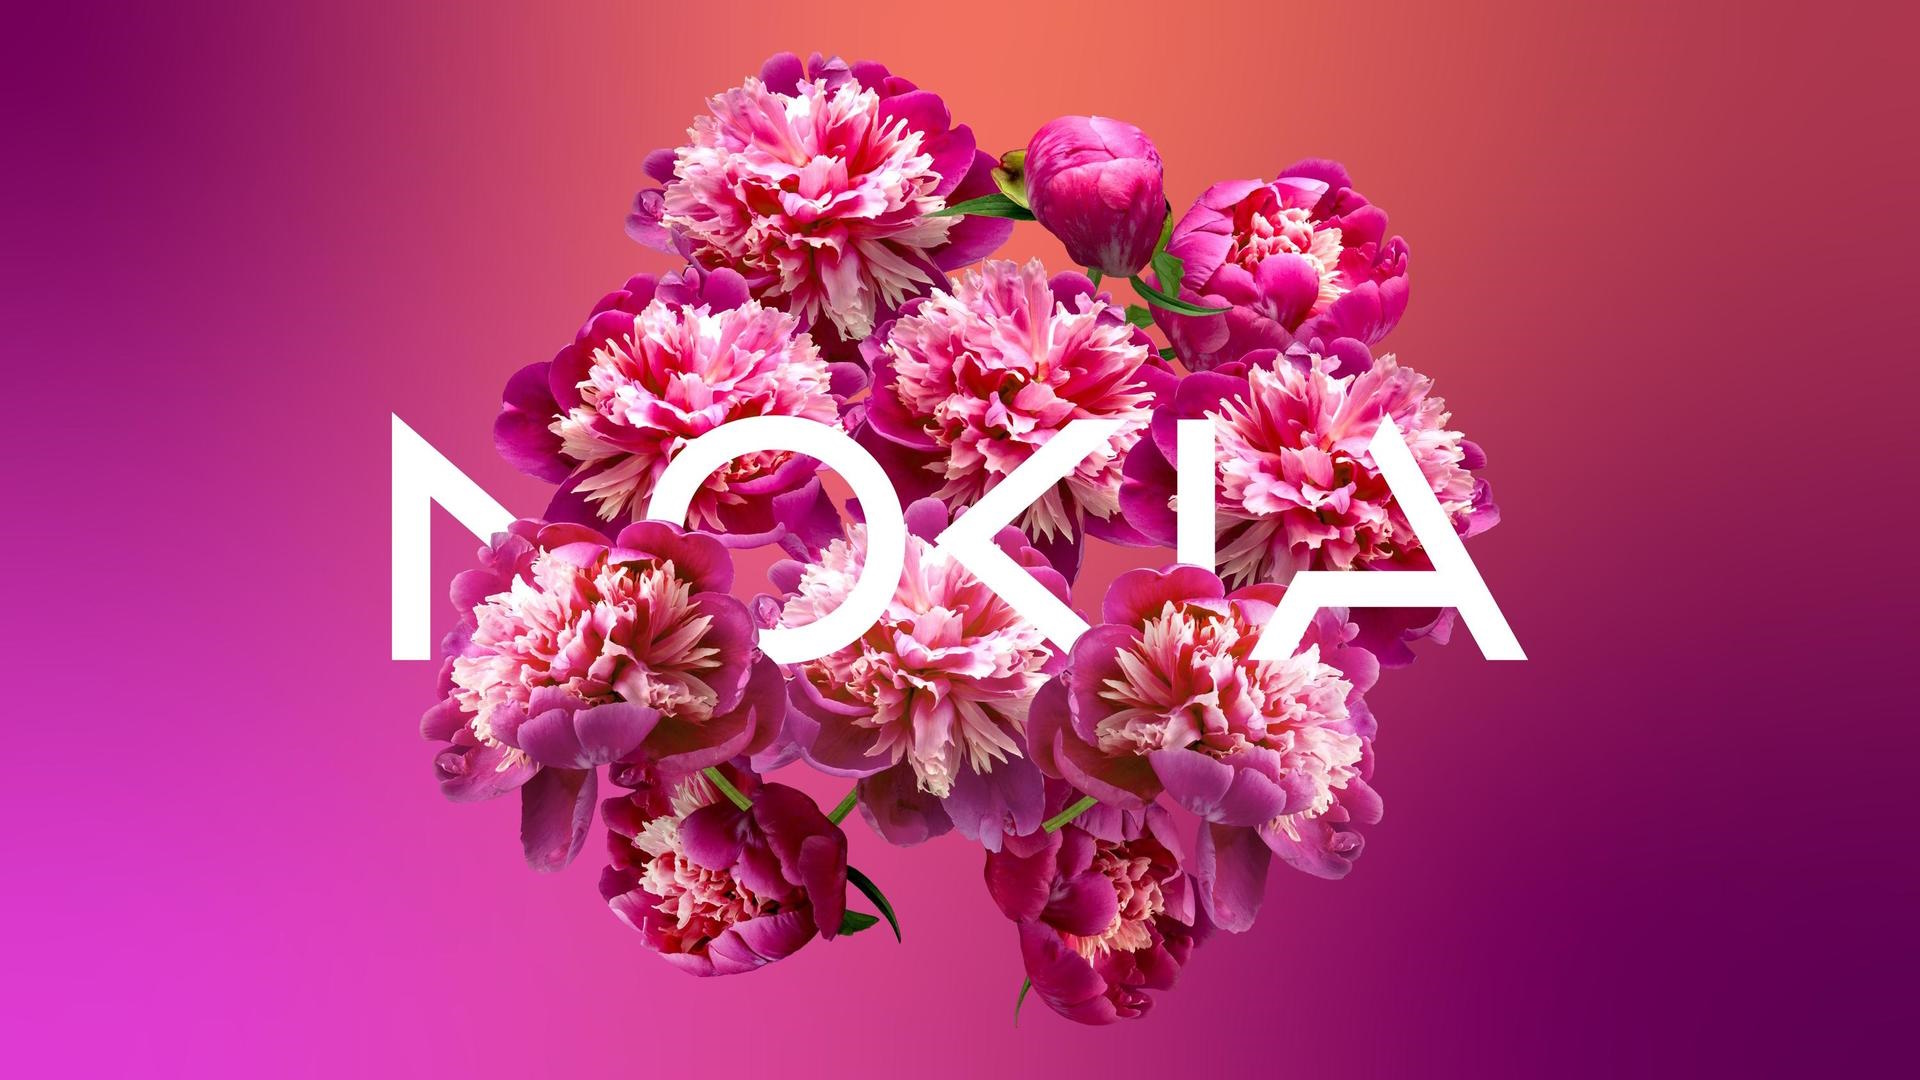 Nokia lays off 14,000 employees due to 20 percent lower revenue